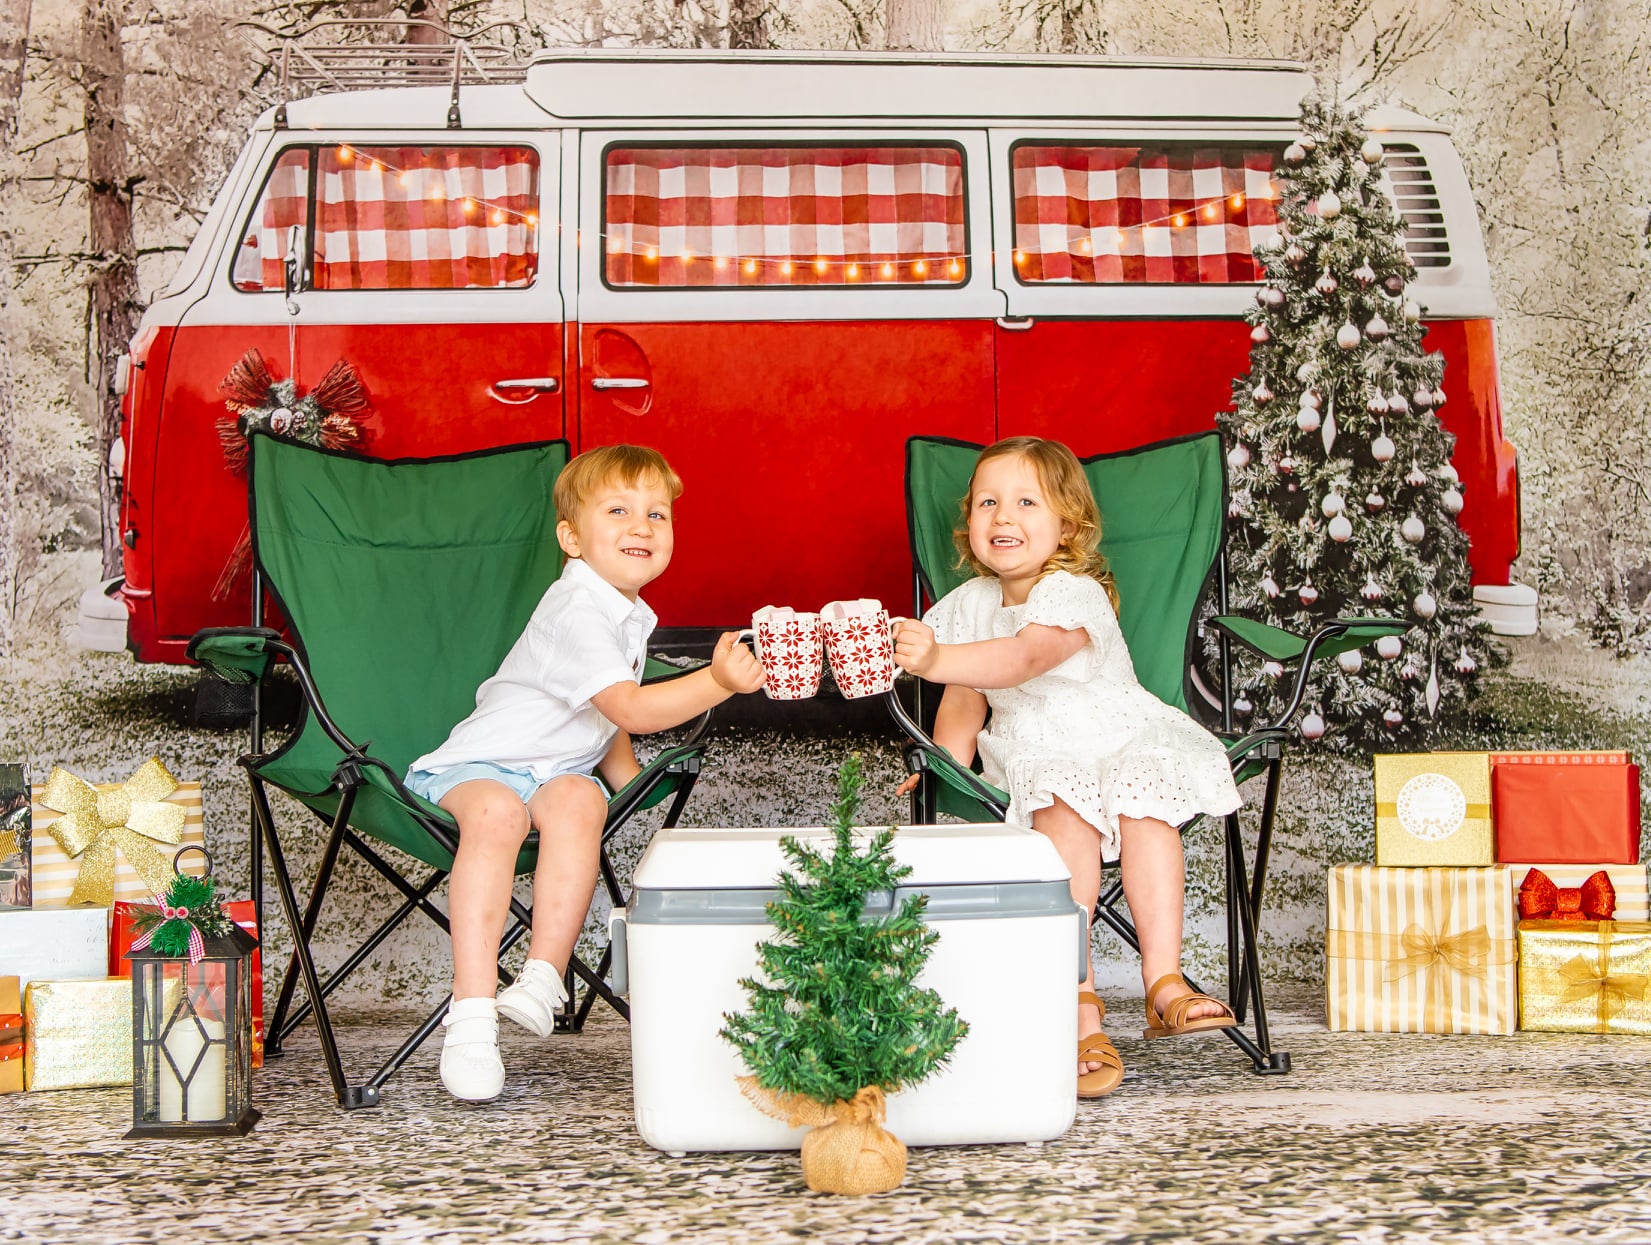 Kate Christmas Tree Red Camper van in Snow Backdrop for Photography Designed by Kerry Anderson